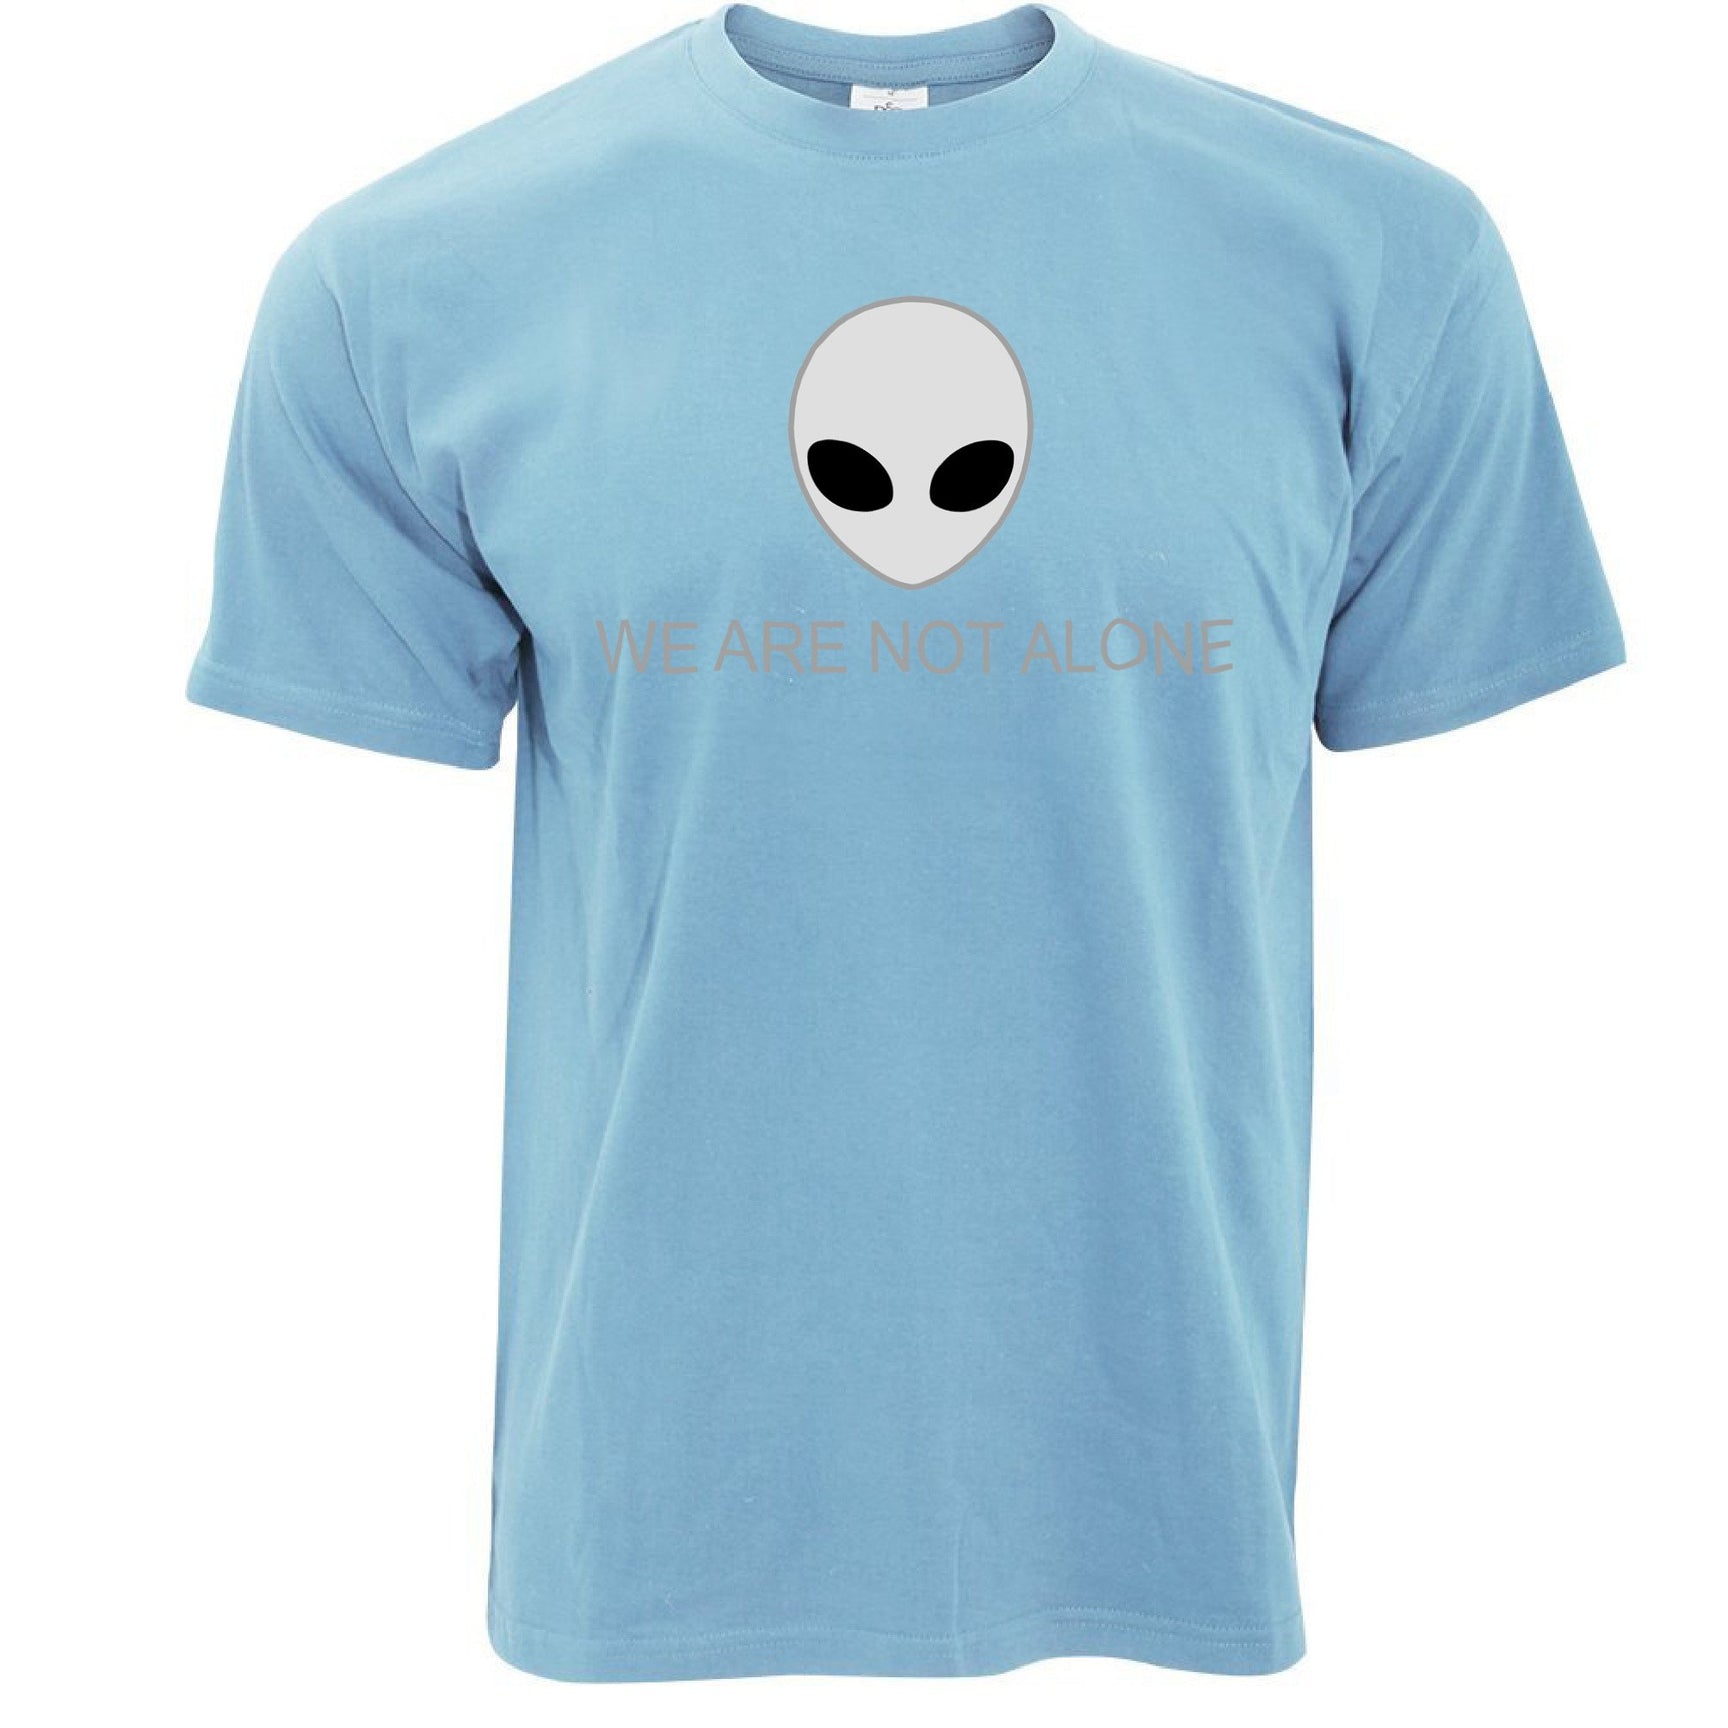 We Are Not Alone Alien Head T Shirt – Shirtbox